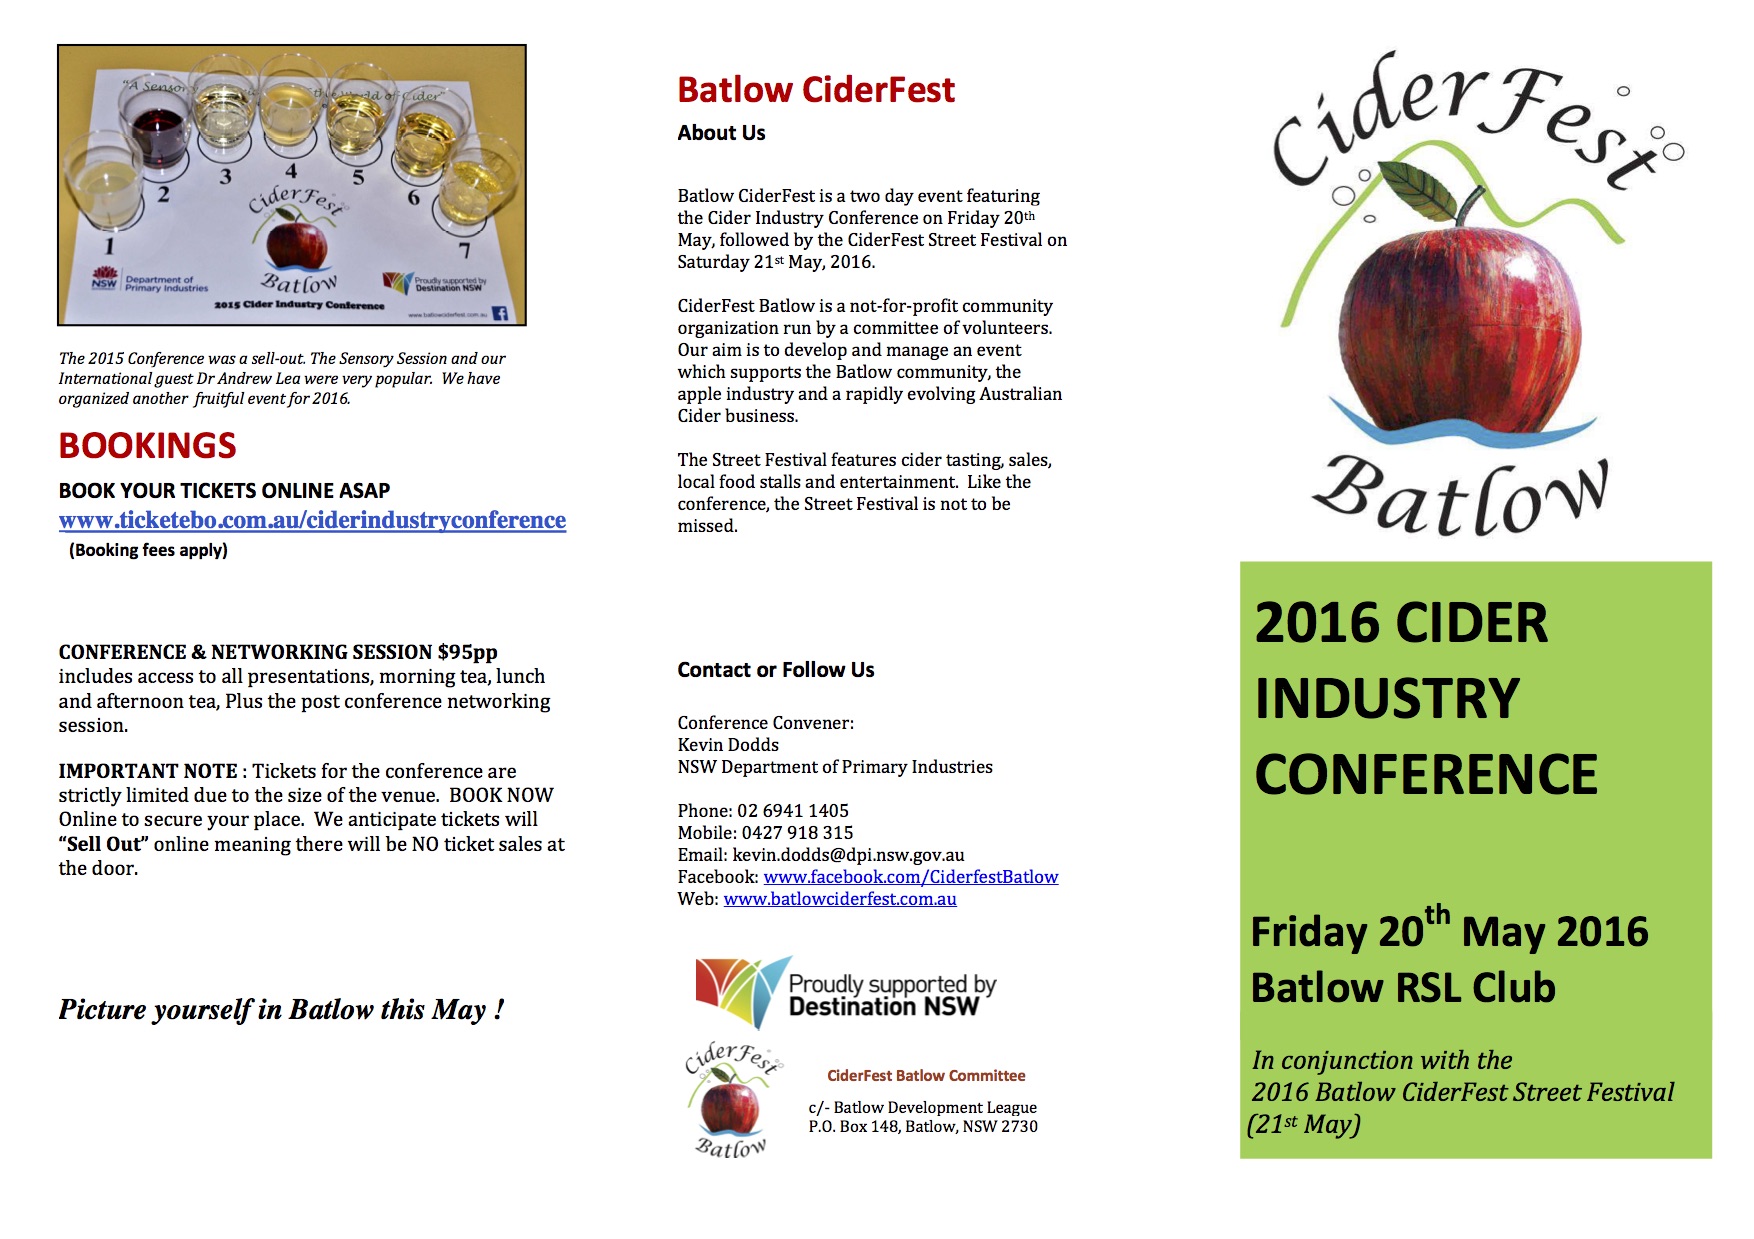 Cider Industry Conference announced Brews News Australia